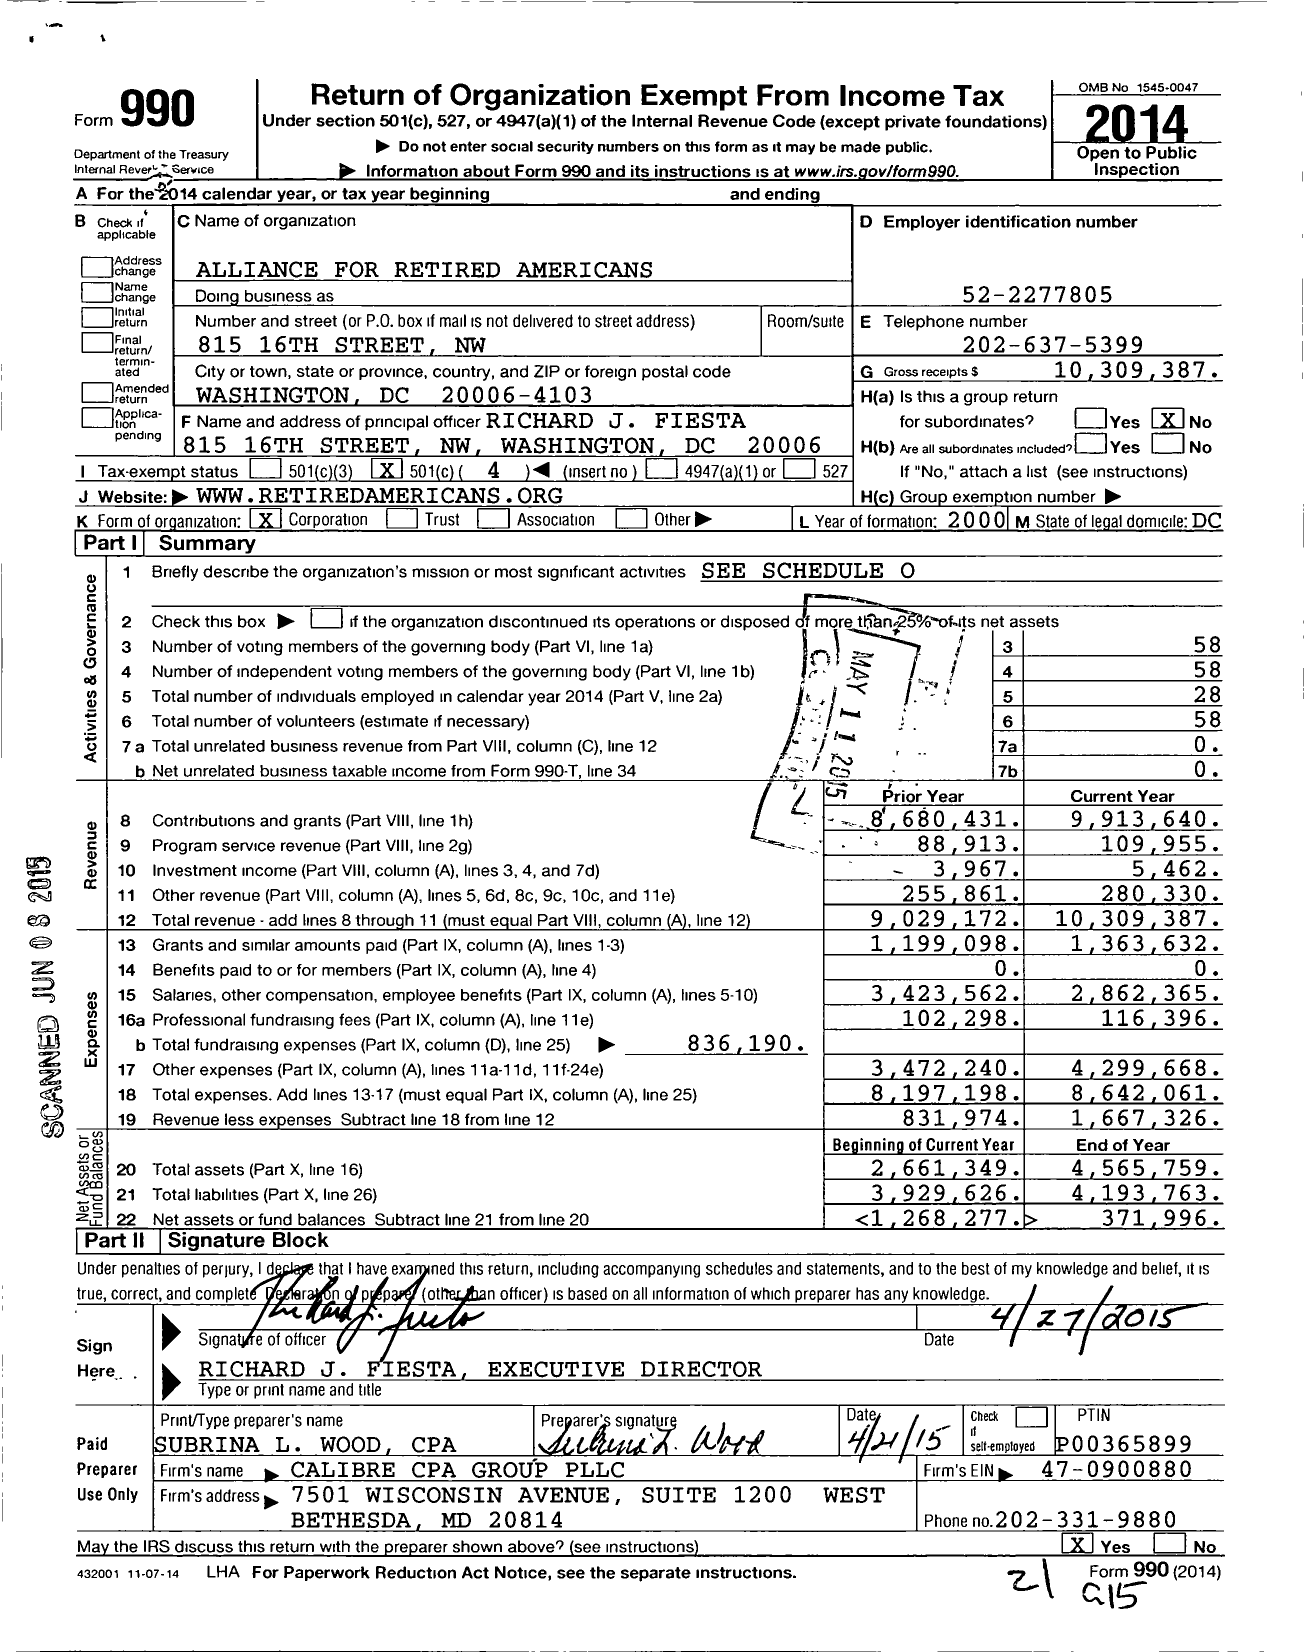 Image of first page of 2014 Form 990O for Alliance for Retired Americans (ARA)